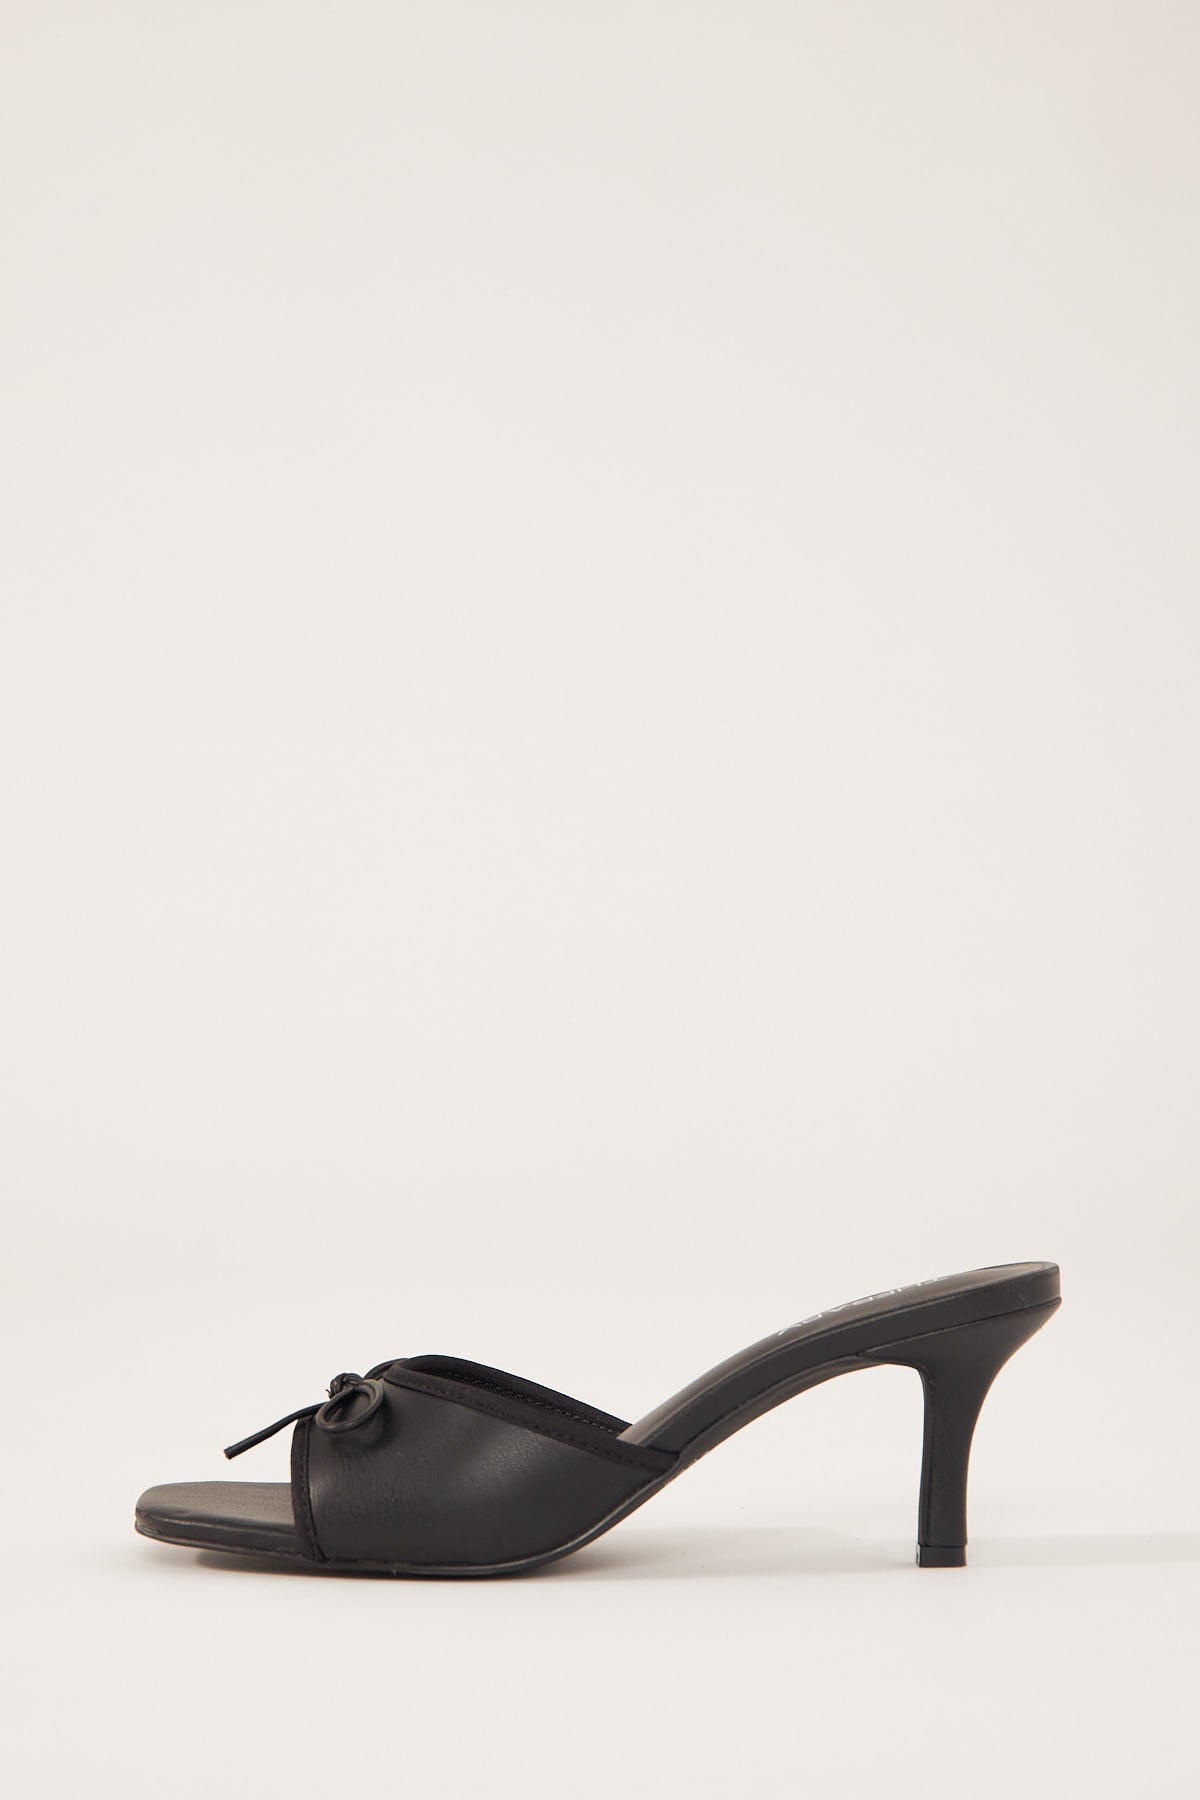 Therapy Jenner Heels Black